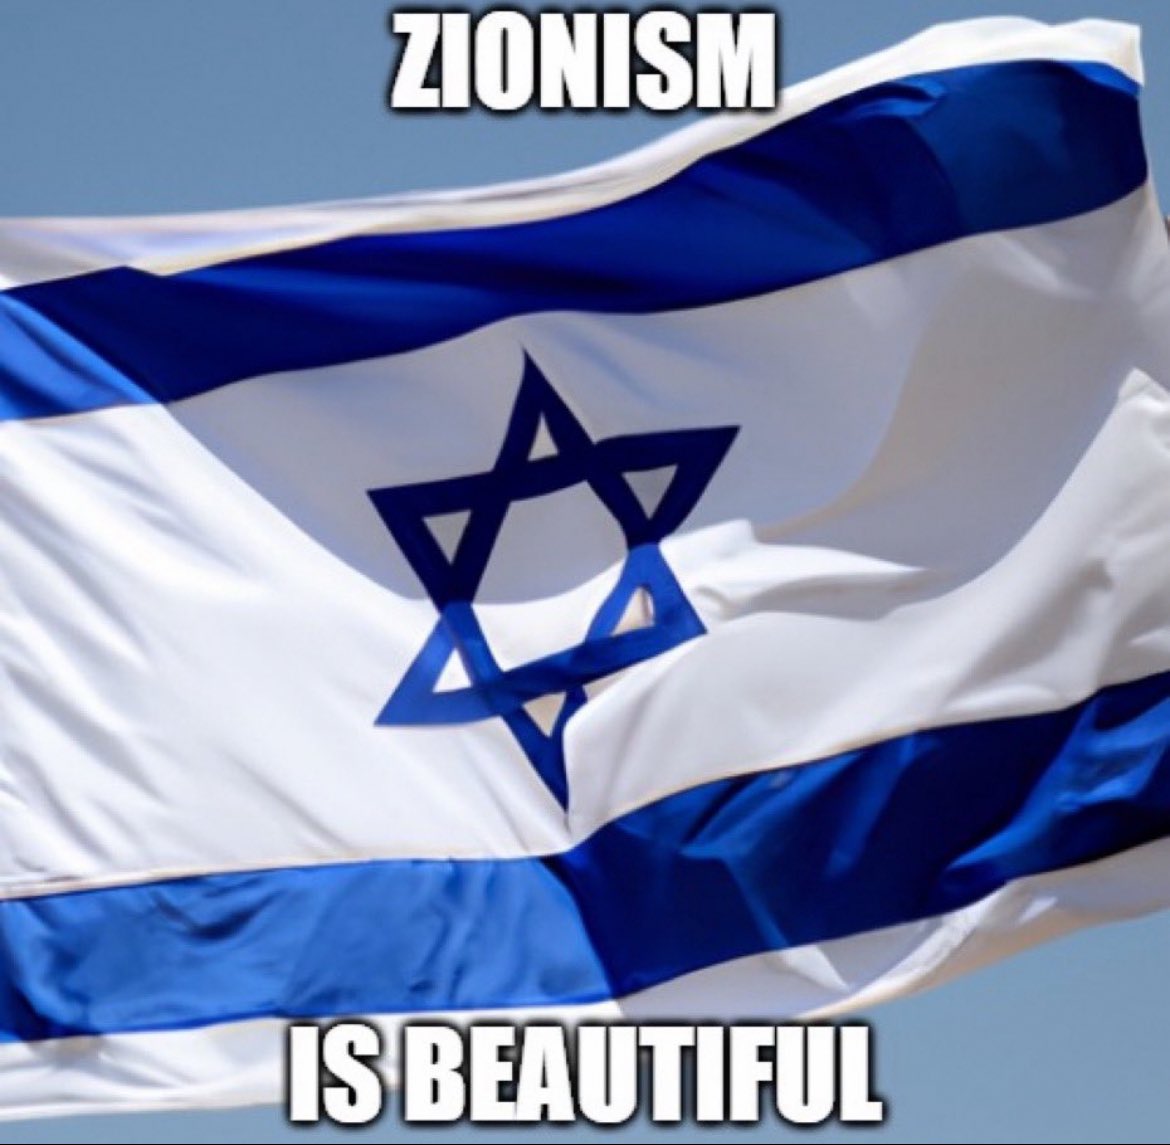 Zionism is indeed beautiful.